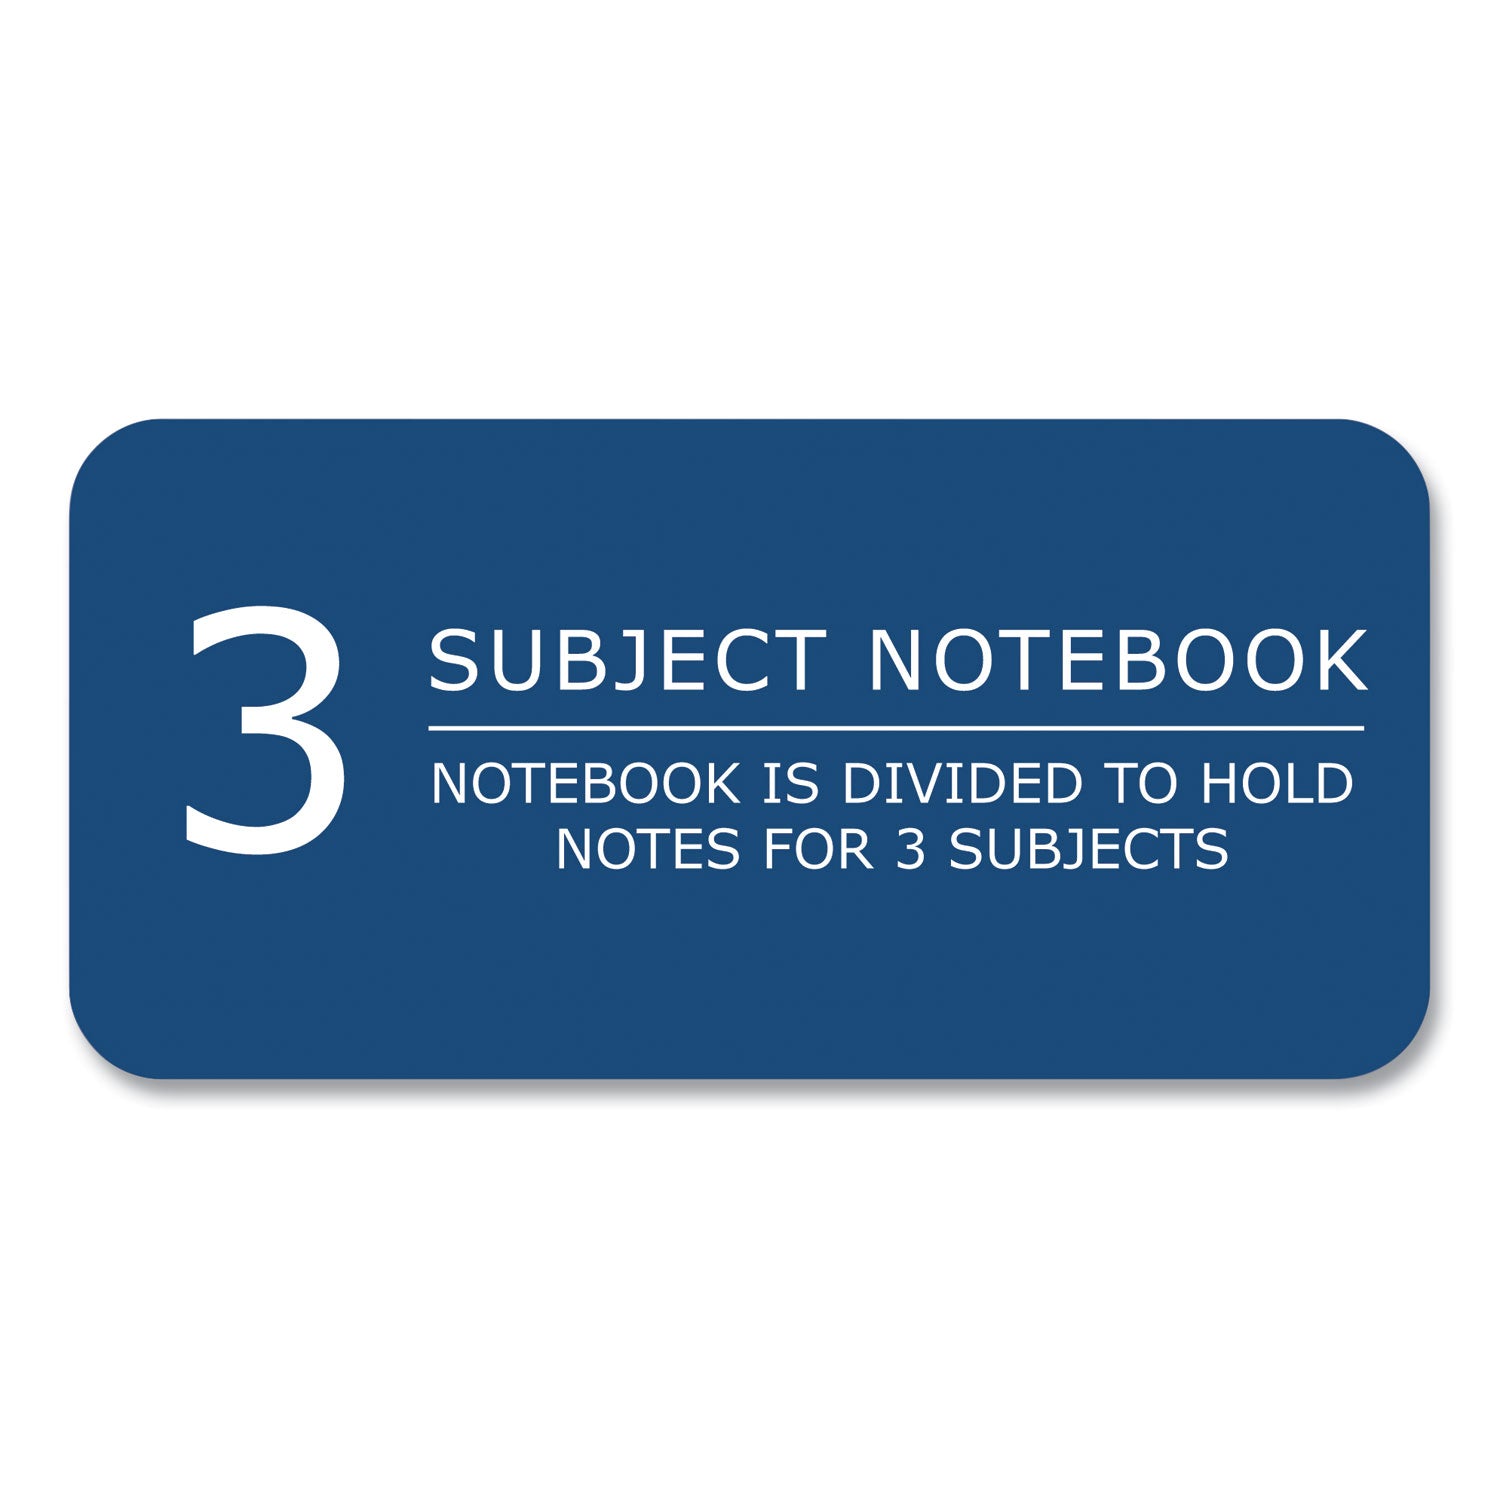 genesis-notebook-3-subject-medium-college-rule-randomly-asst-cover-color-150-11x9-sheets-12-ct-ships-in-4-6-bus-days_roa13114cs - 8